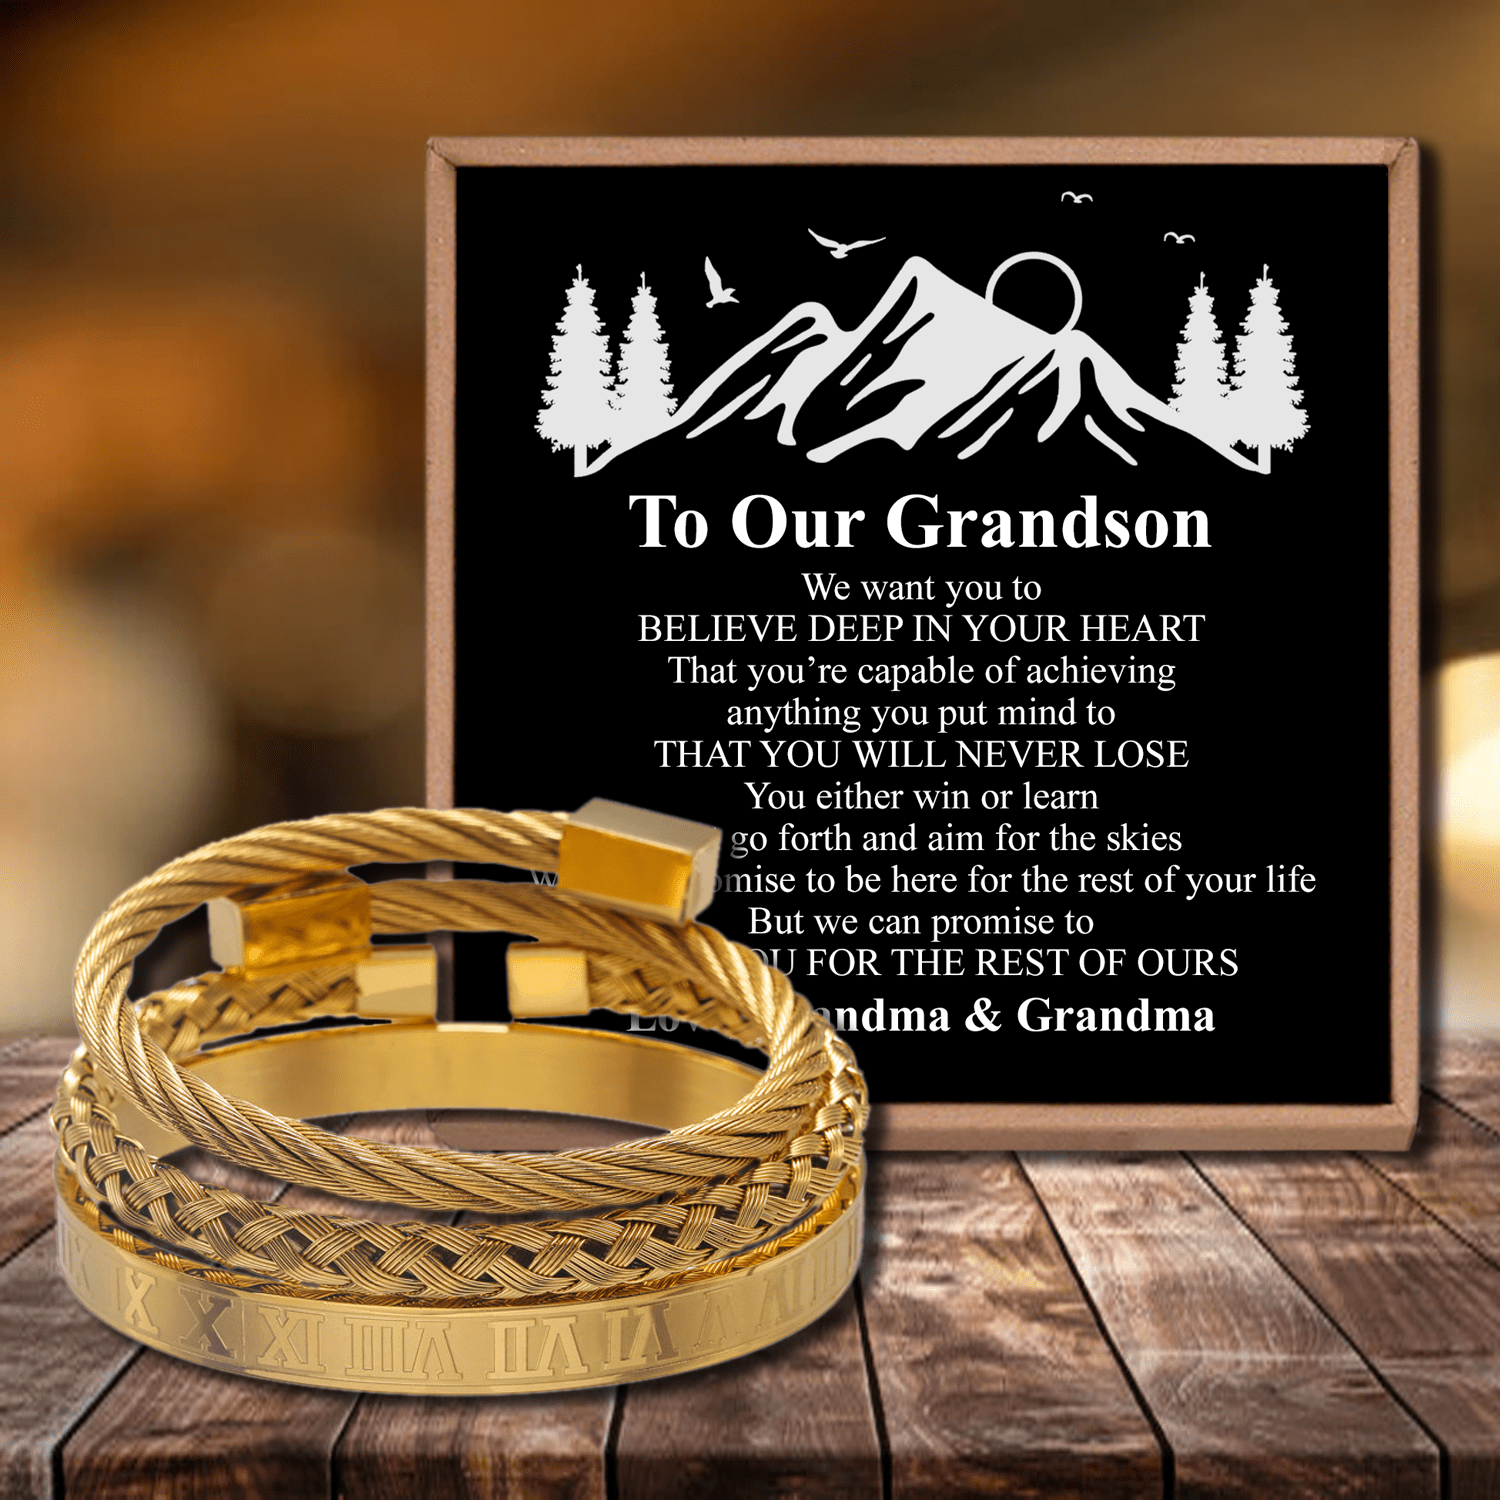 Bracelets To Our Grandson - You Will Never Lose Roman Numeral Bracelet Set Gold GiveMe-Gifts